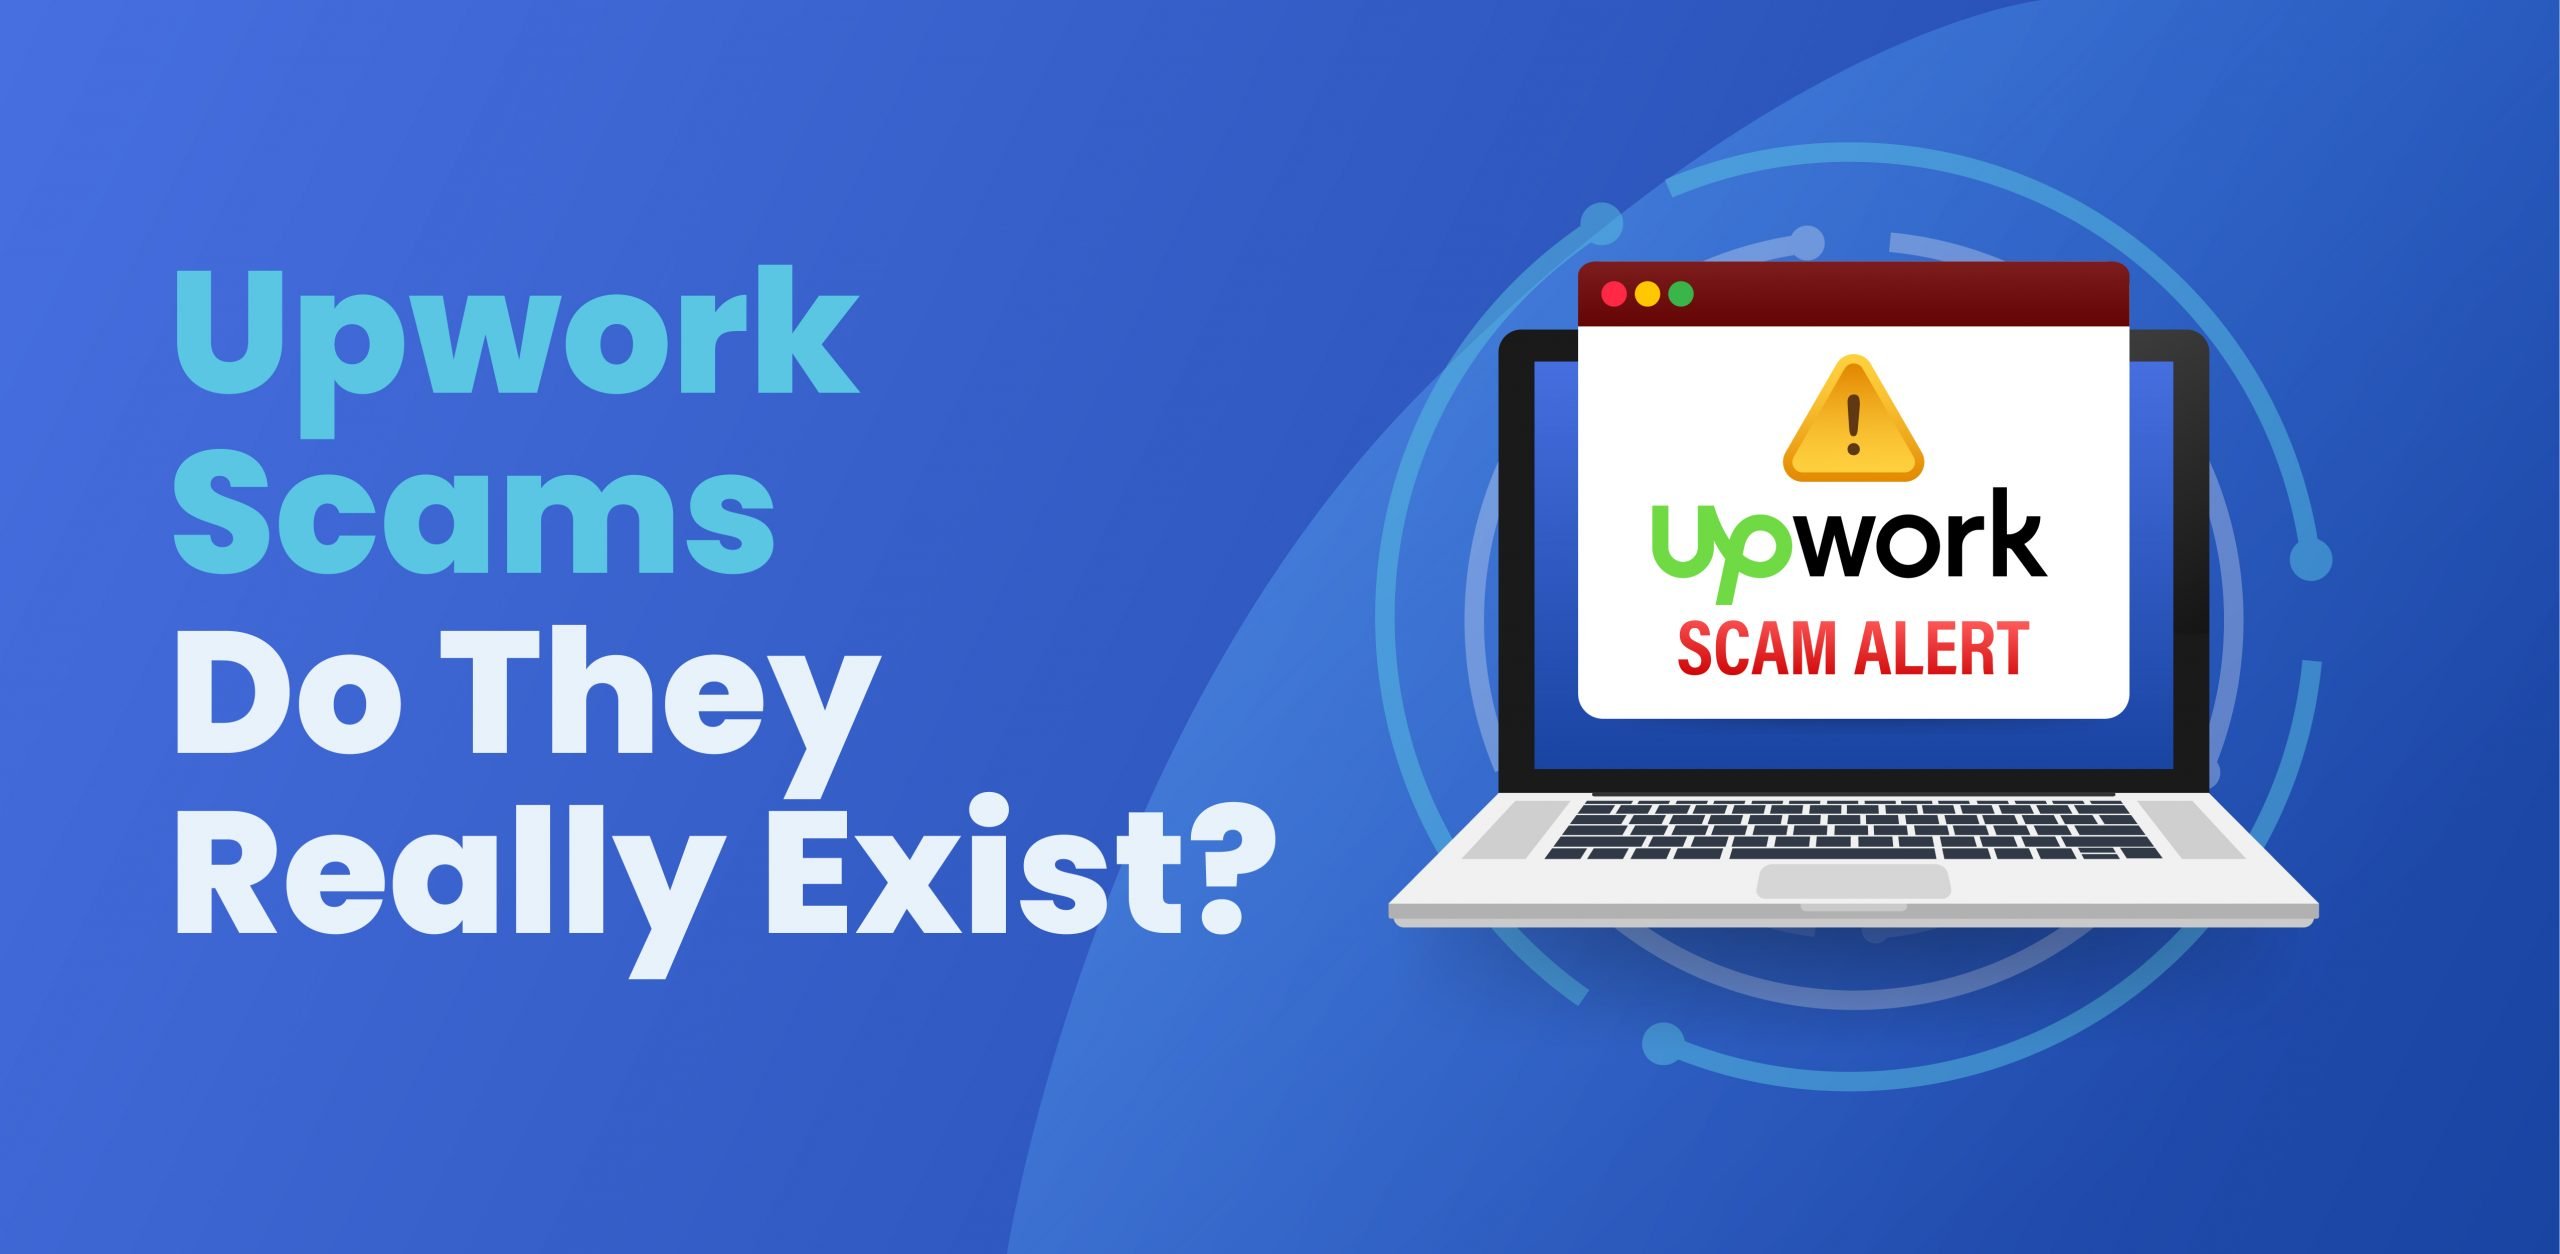 Upwork Scams - Do They Really Exist?